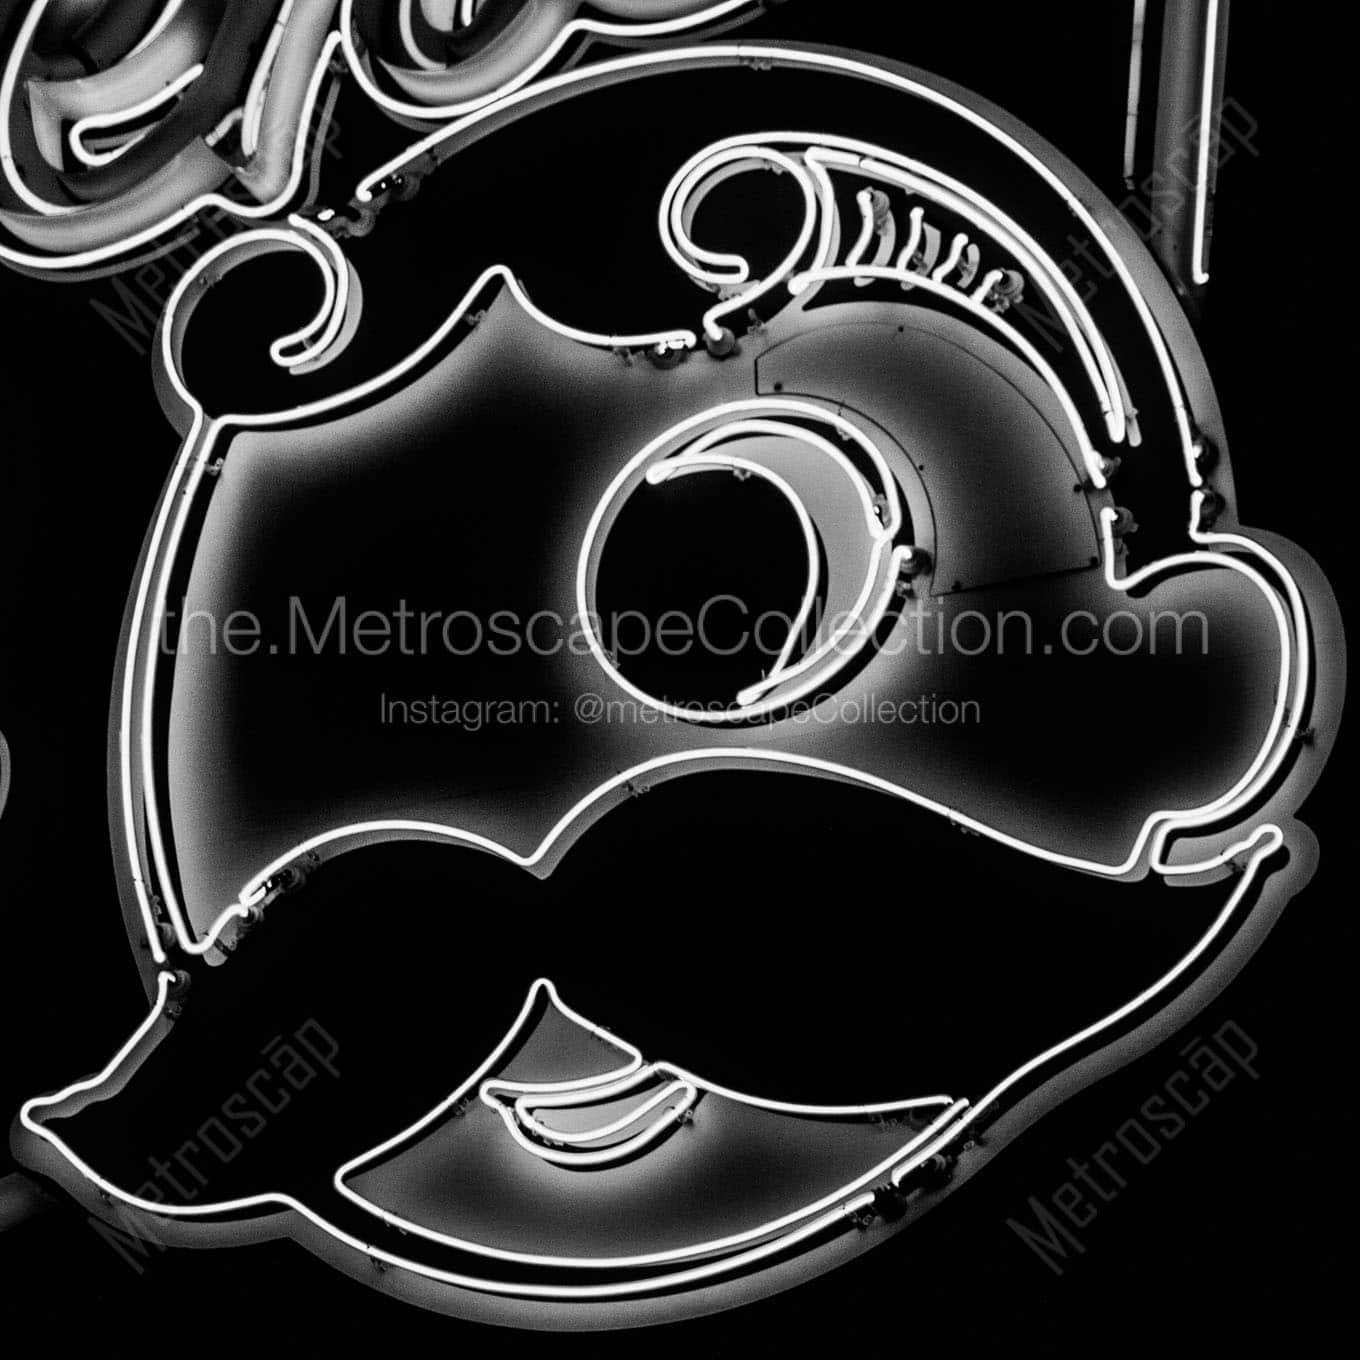 natty boh sign brewers hill Black & White Office Art